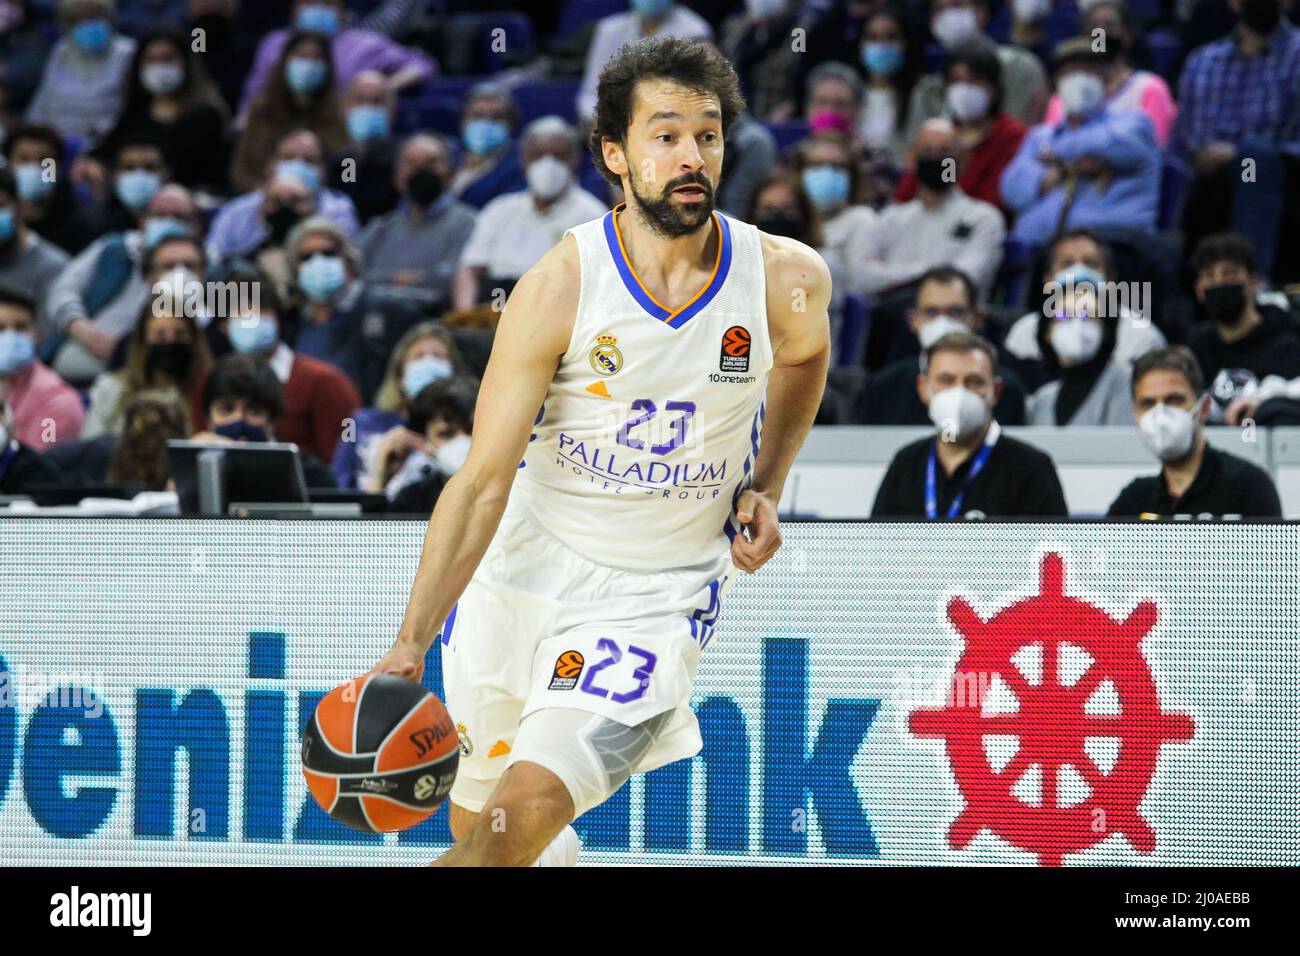 Madrid, Spain. 17th Mar, 2022. Sergio Llull Melia of Real Madrid during the Turkish Airlines Euroleague basketball match between Real Madrid and Asvel Lyon-Villeurbanne on march 17, 2022 at Wizink Center in Madrid, Spain Credit: Independent Photo Agency/Alamy Live Newss Stock Photo